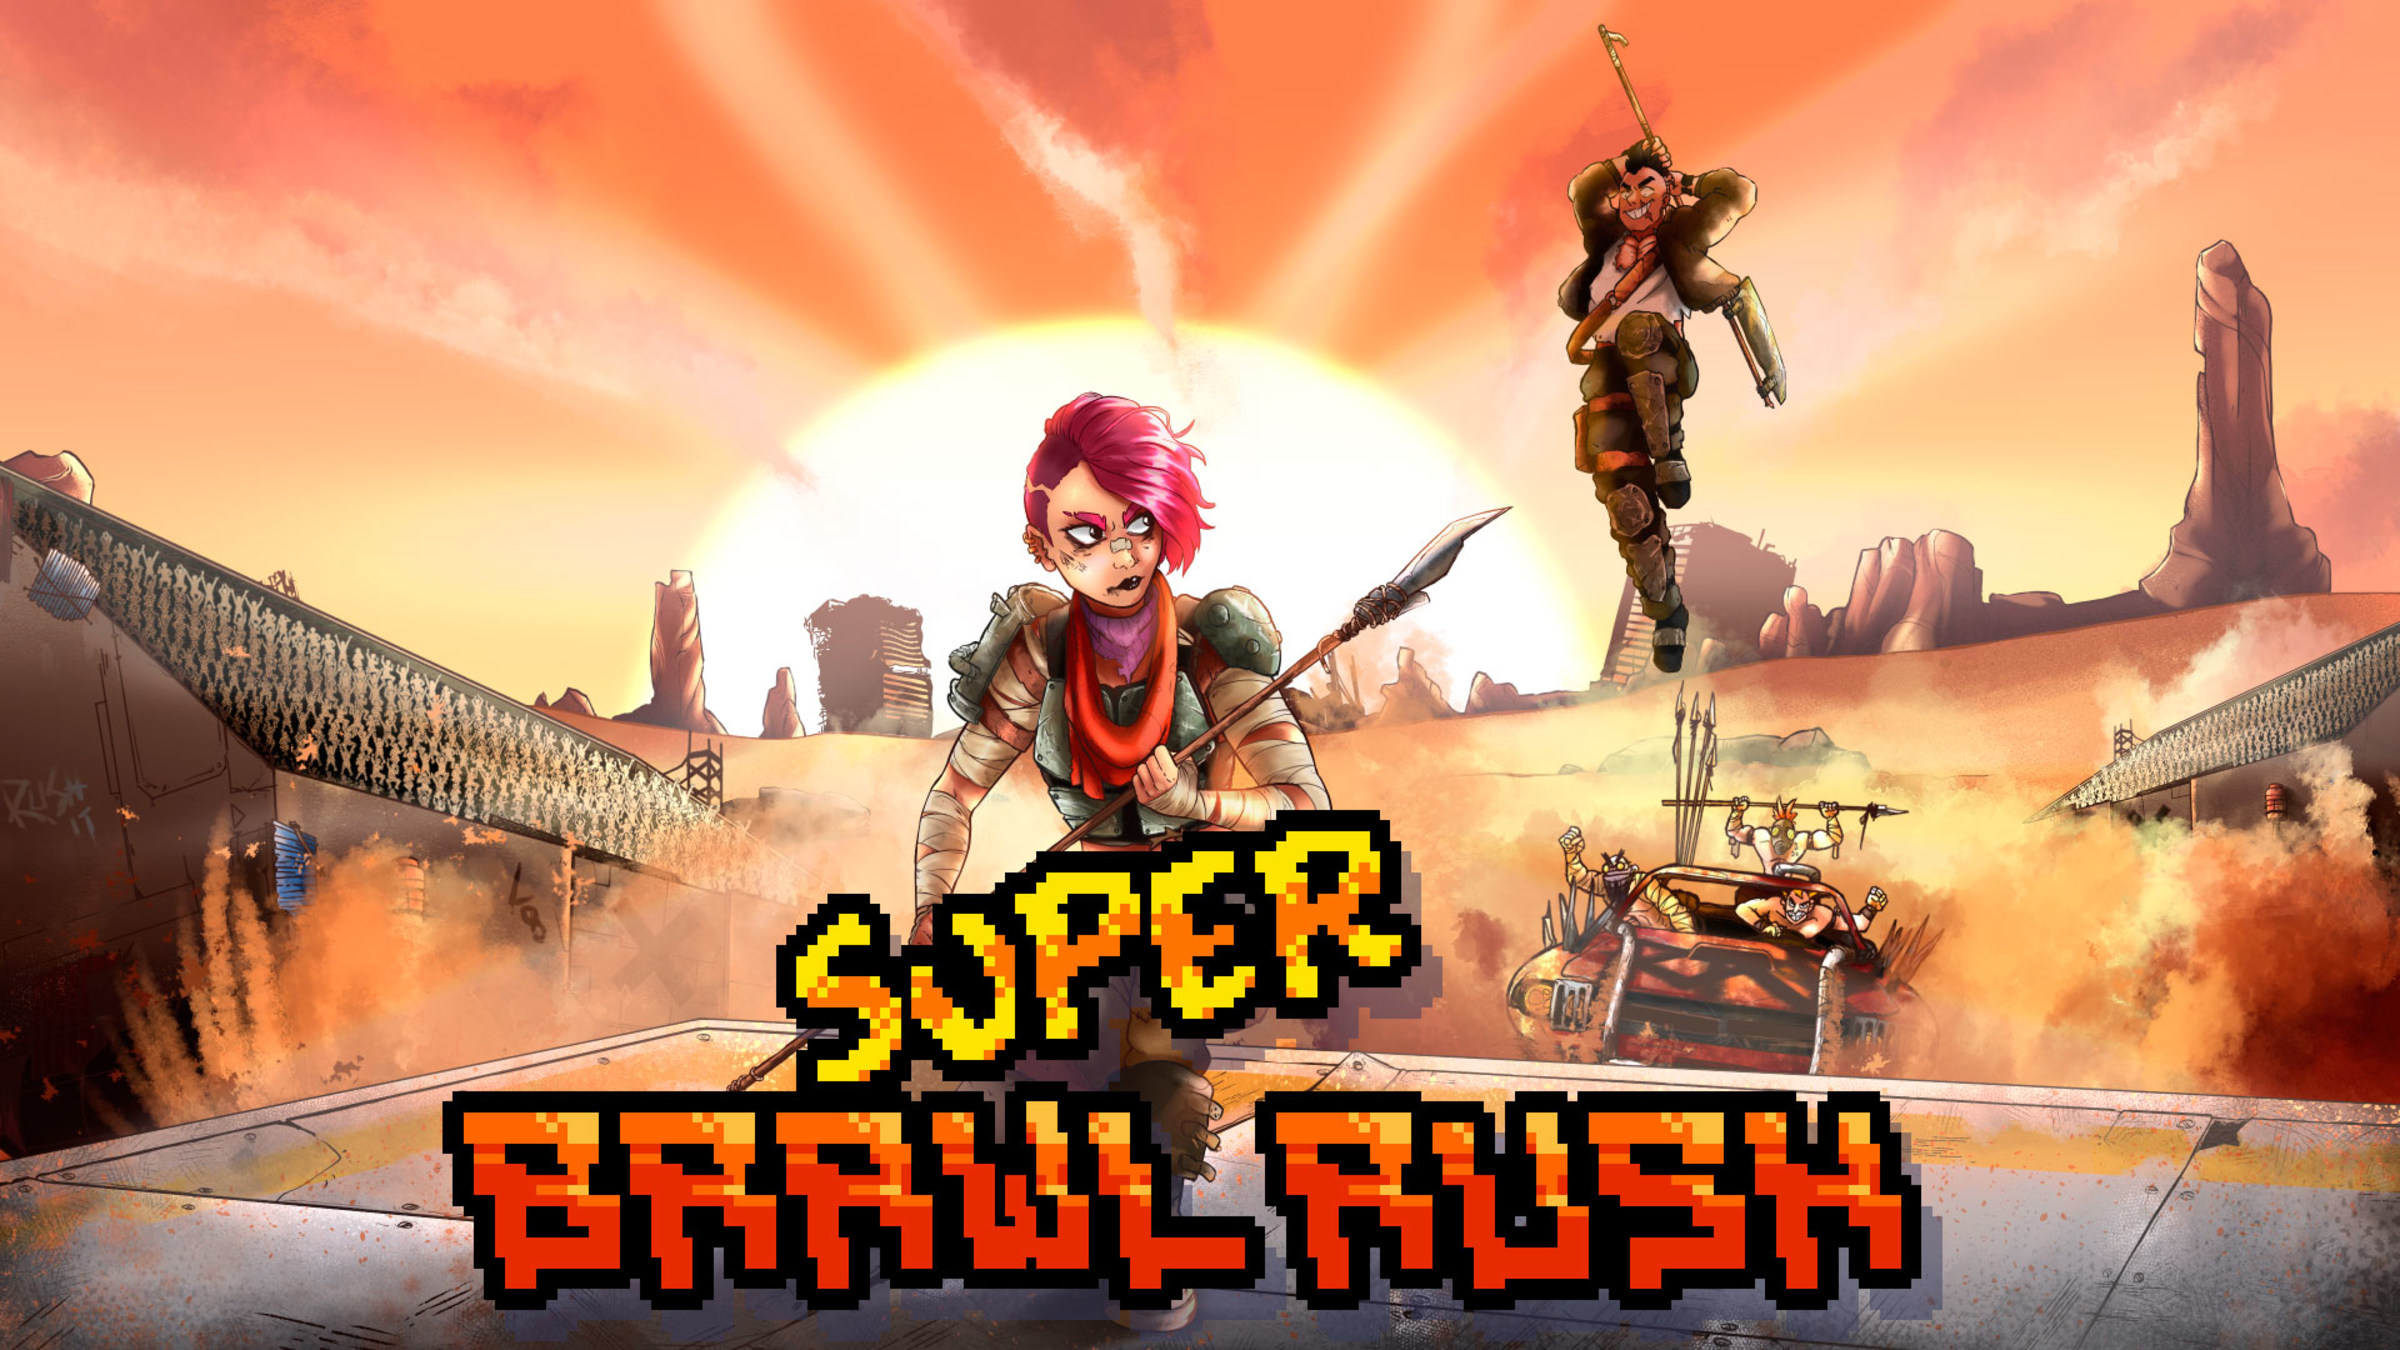 SUPERBRAWL - Play Online for Free!